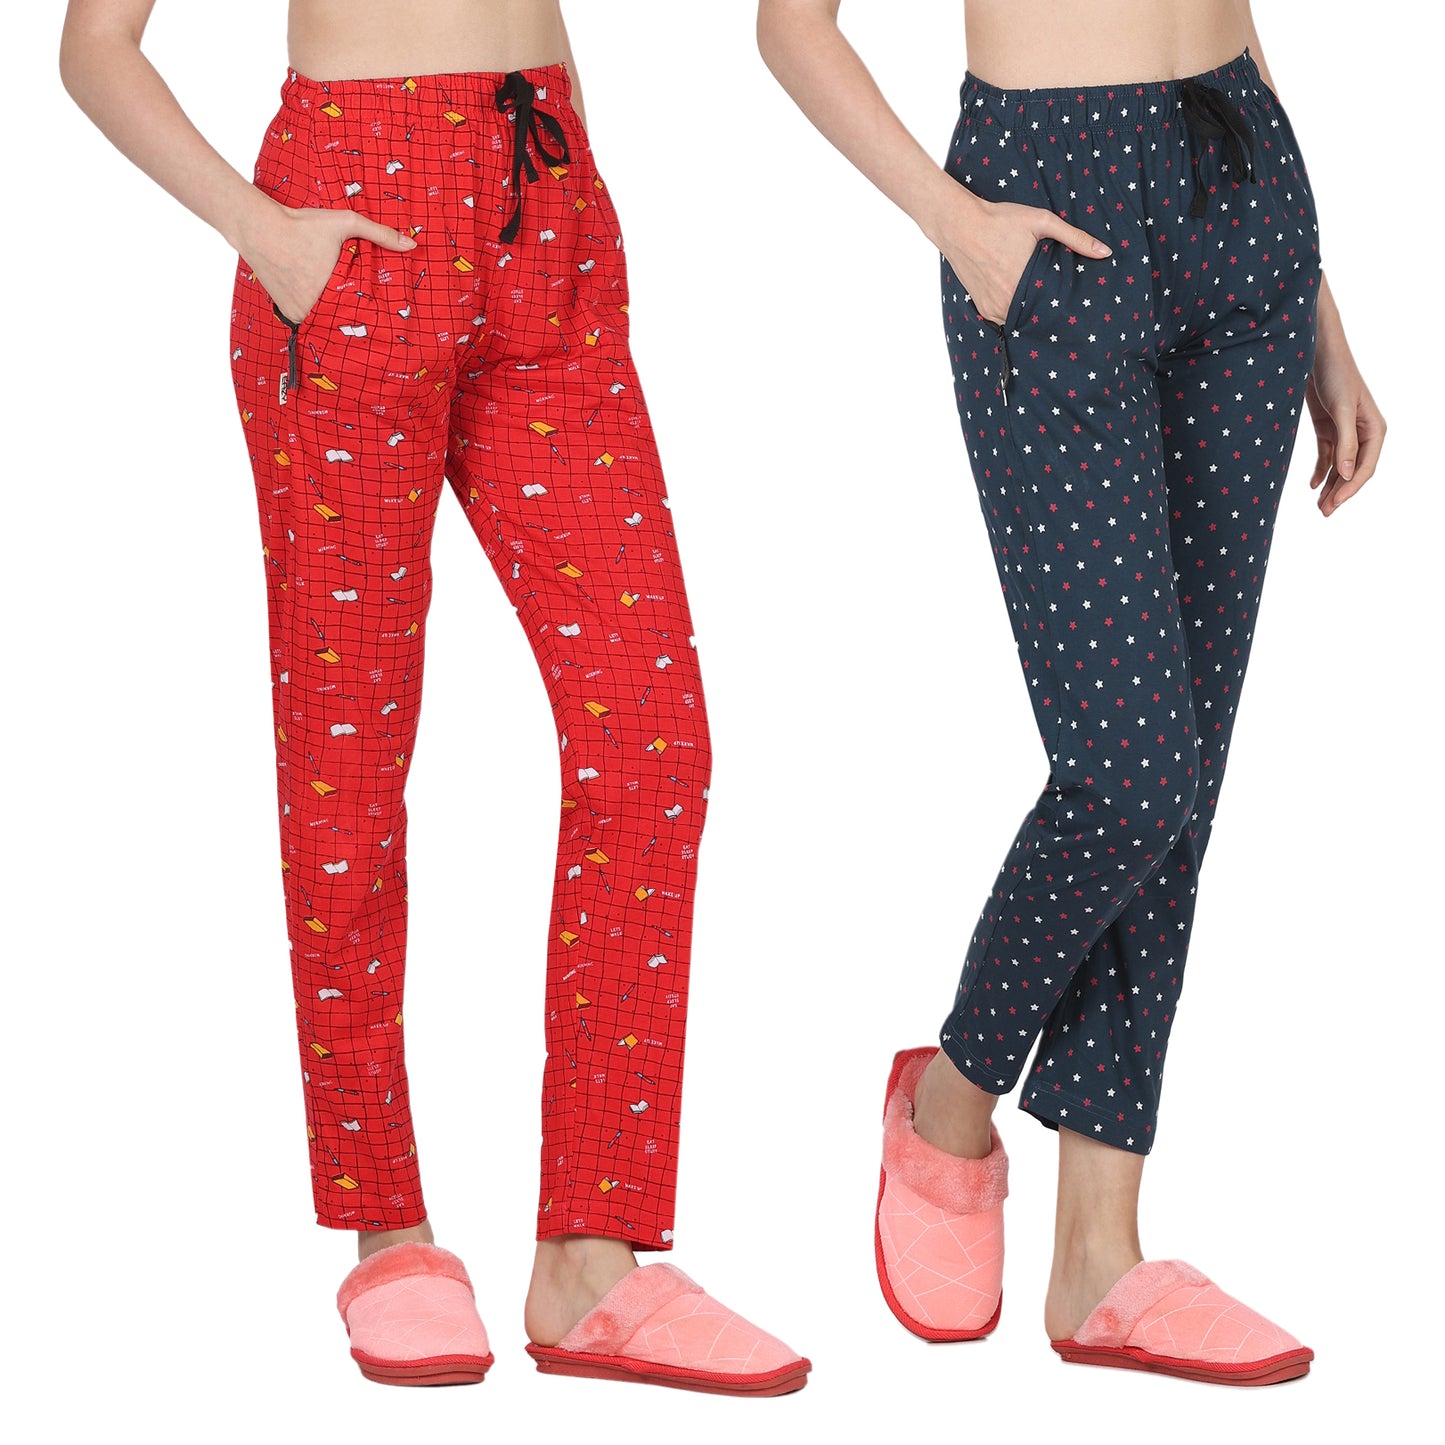 Eazy Women's Printed Lower - Pack of 2 - Bright Red & Pine Green